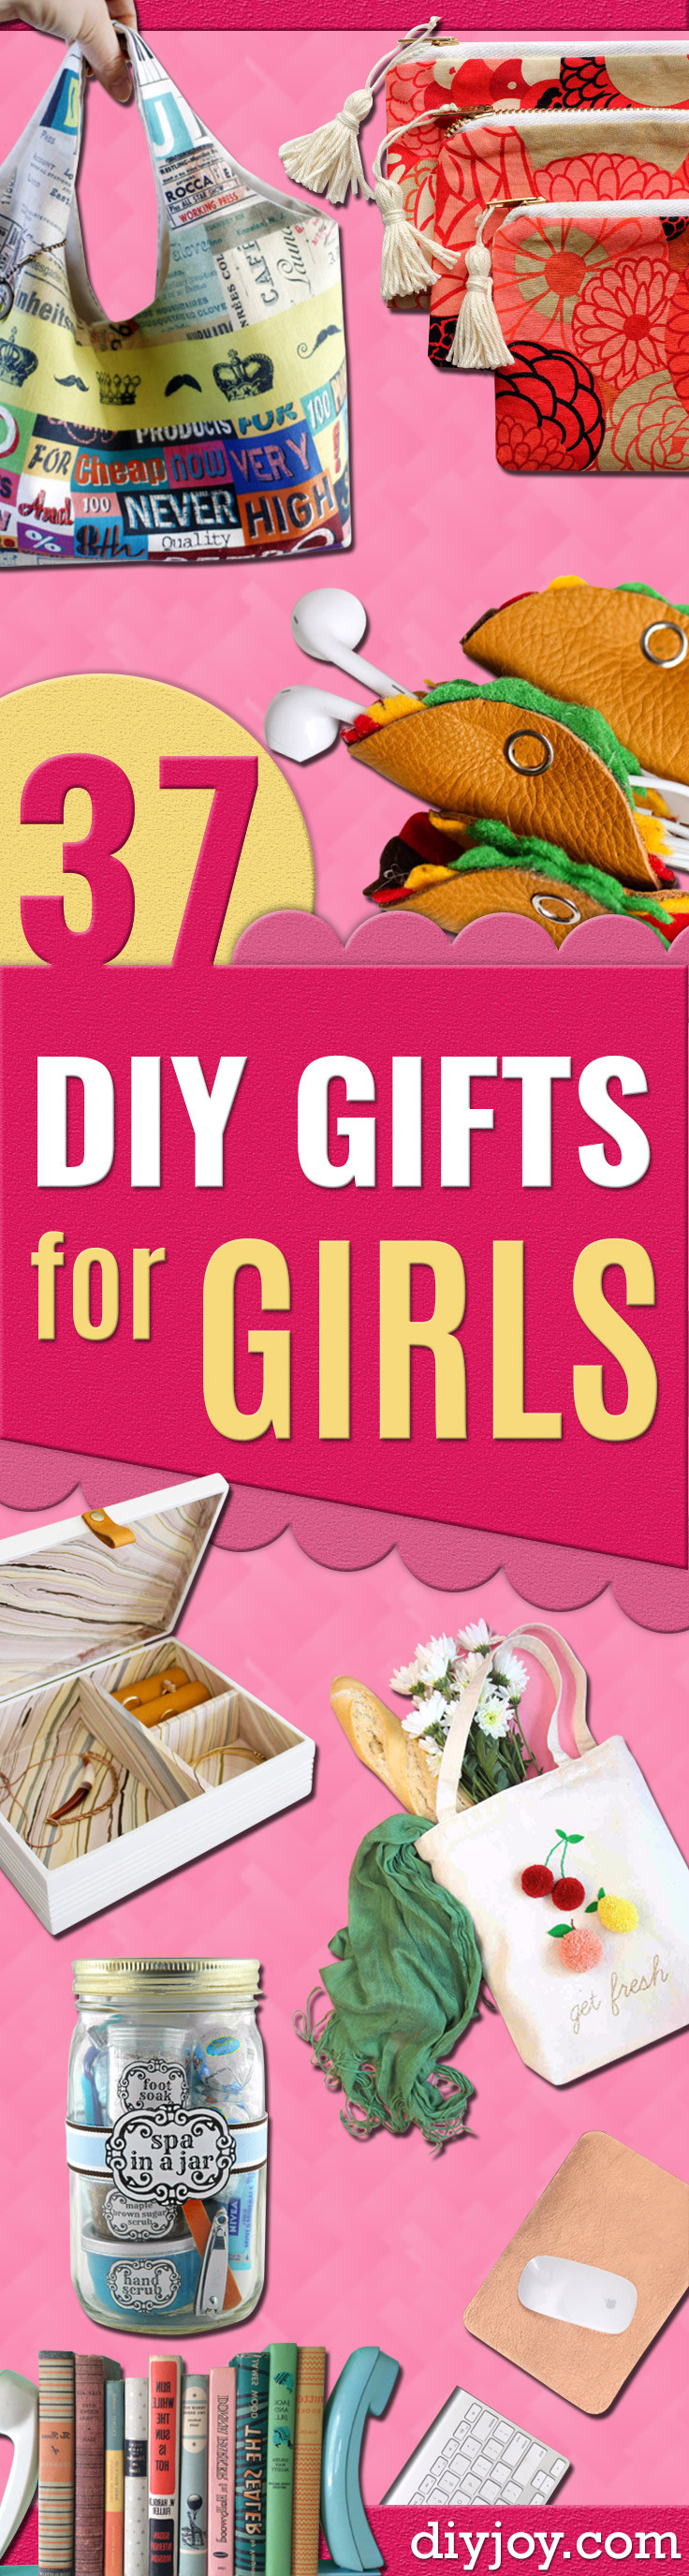 Cheap Gift Ideas For Girls
 37 Best DIY Gifts for Girls